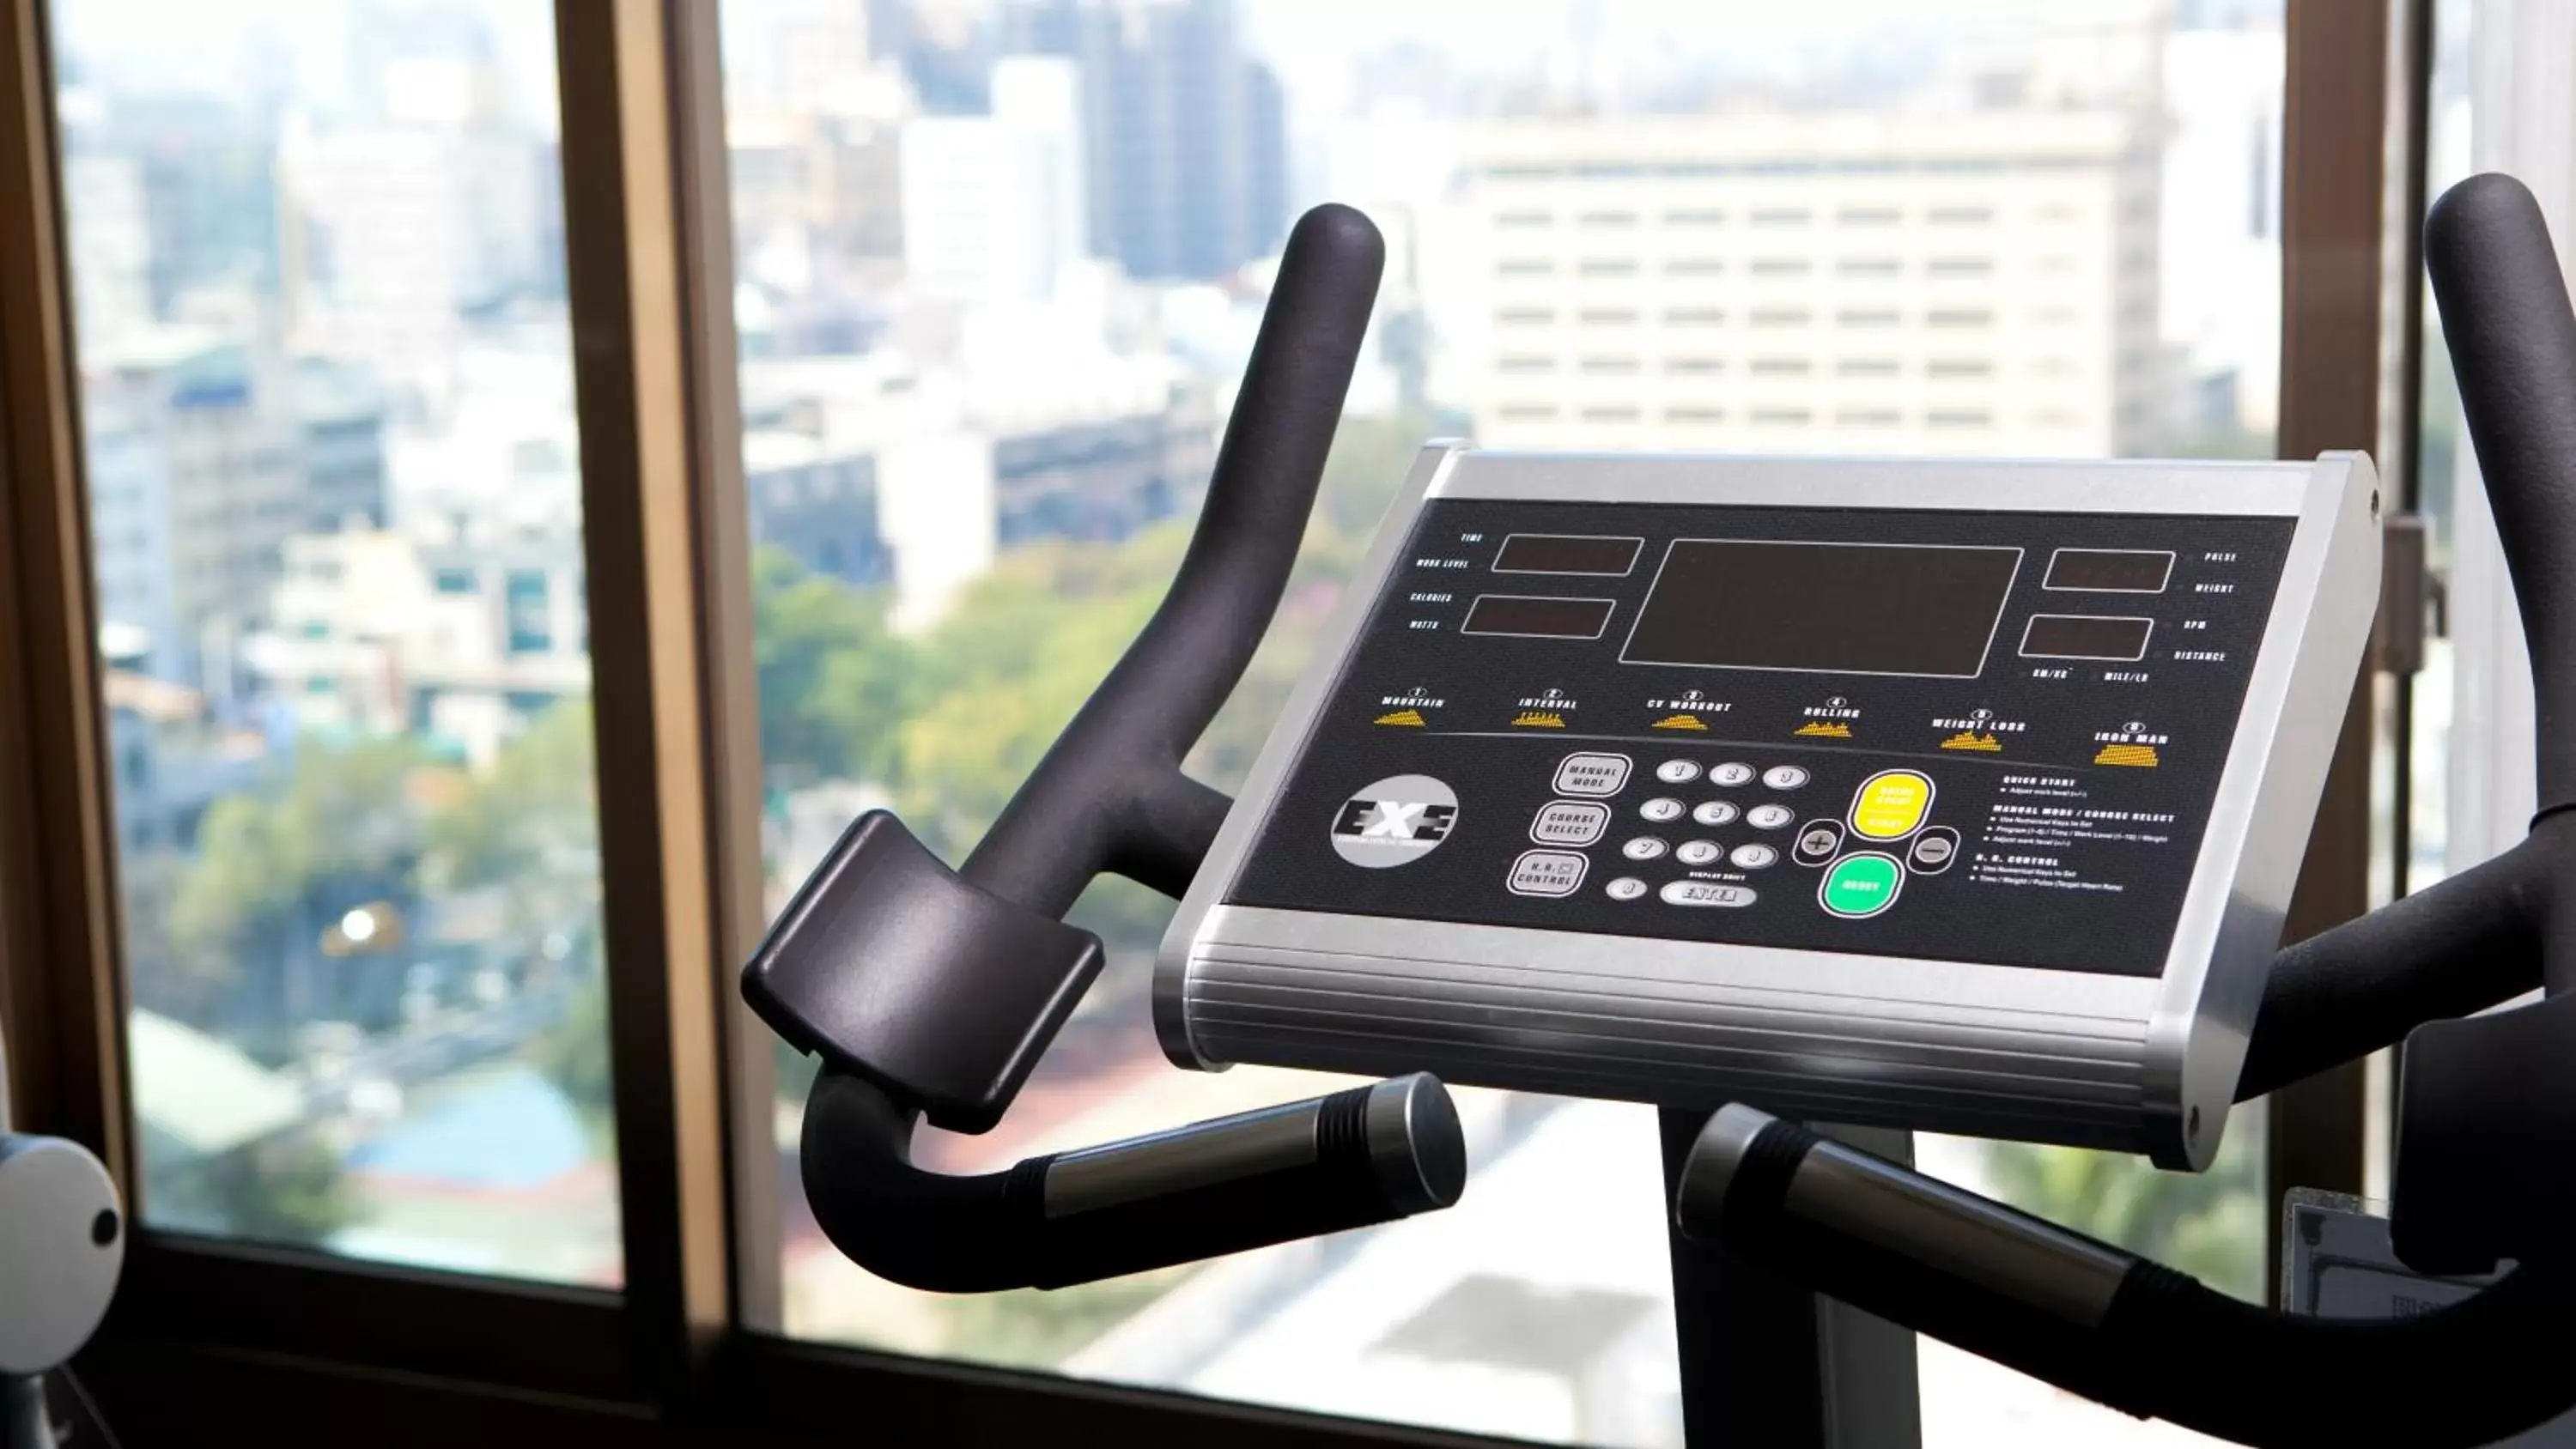 Fitness centre/facilities, Fitness Center/Facilities in The Howard Plaza Hotel Kaohsiung